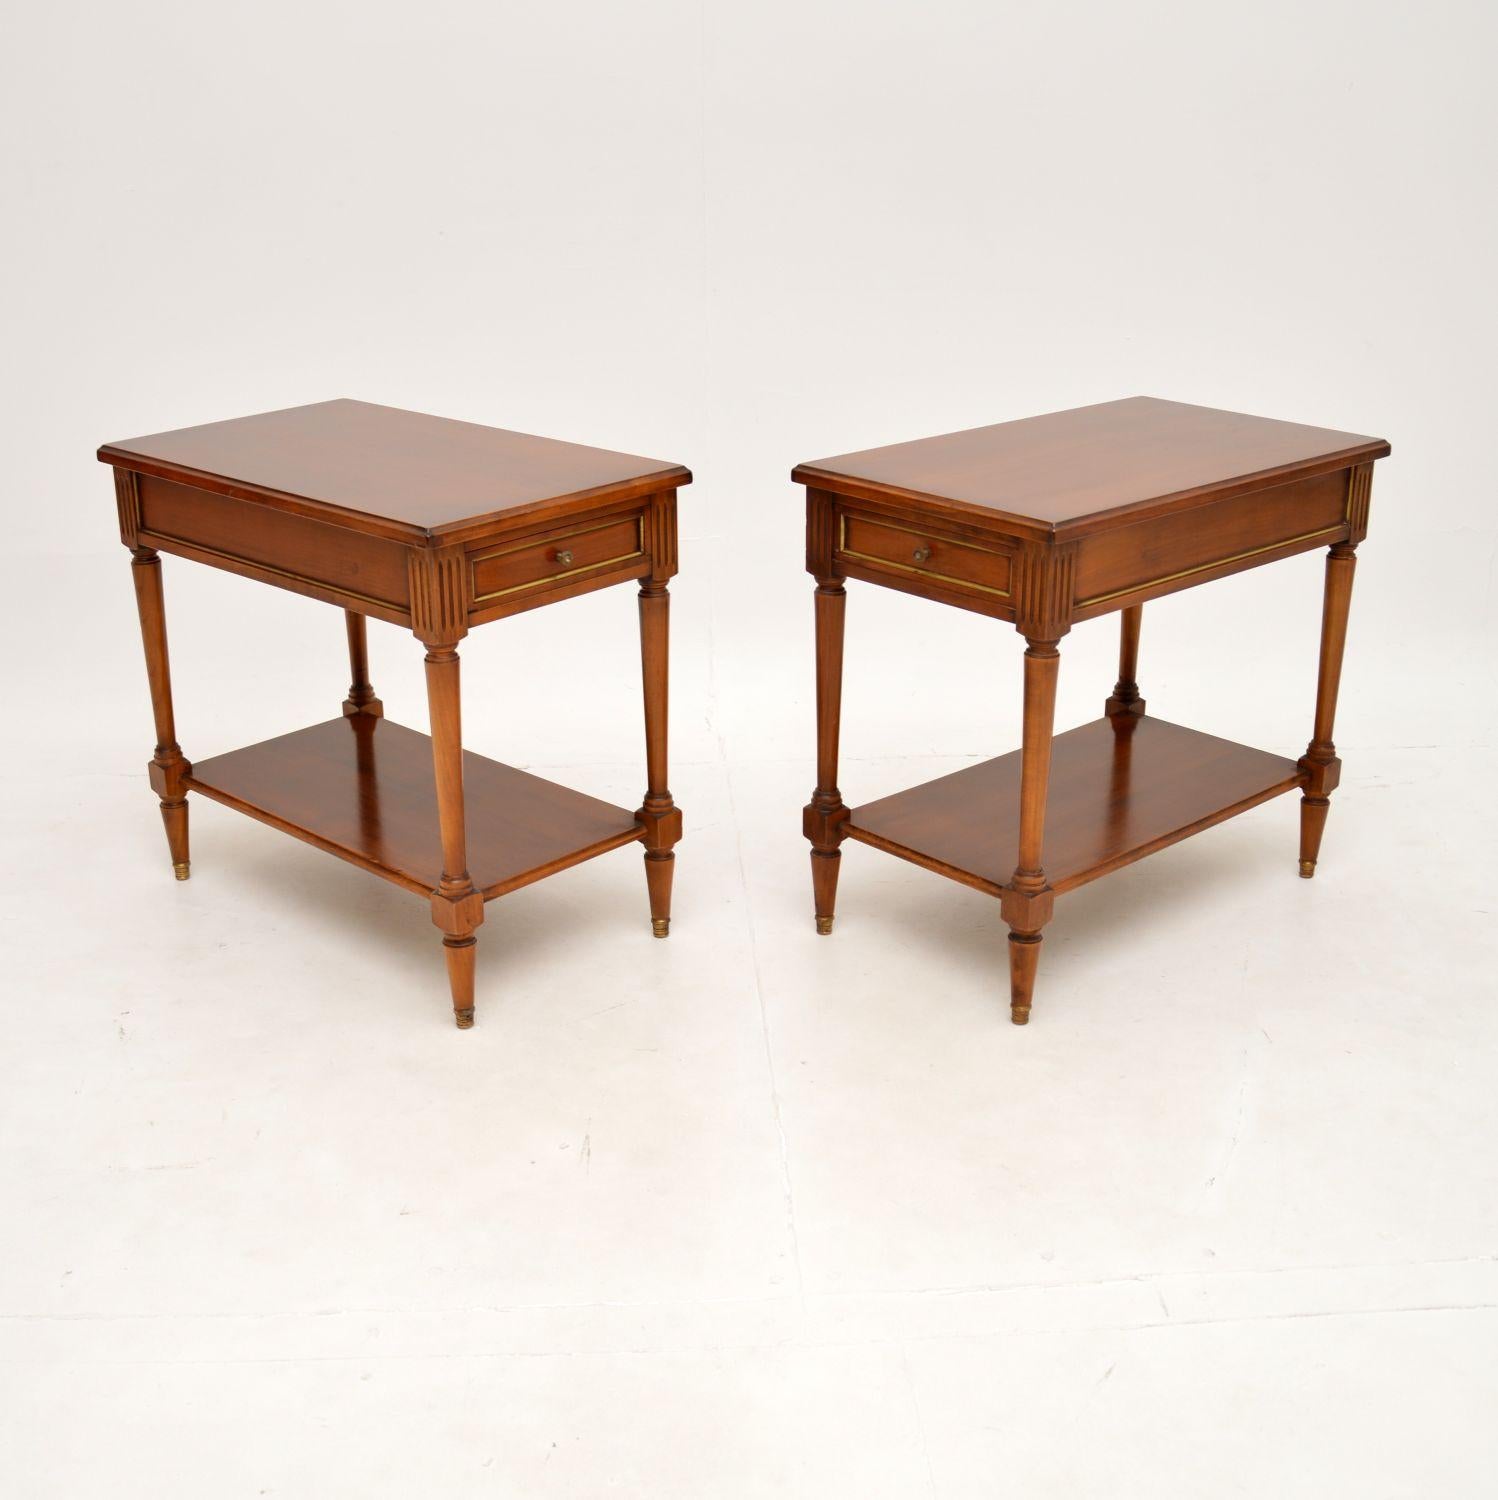 A smart and very well made pair of antique Georgian style walnut side tables. They were made in England, they date from around the 1950’s.

The quality is outstanding, they are a very useful size and are beautifully designed. They sit on finely